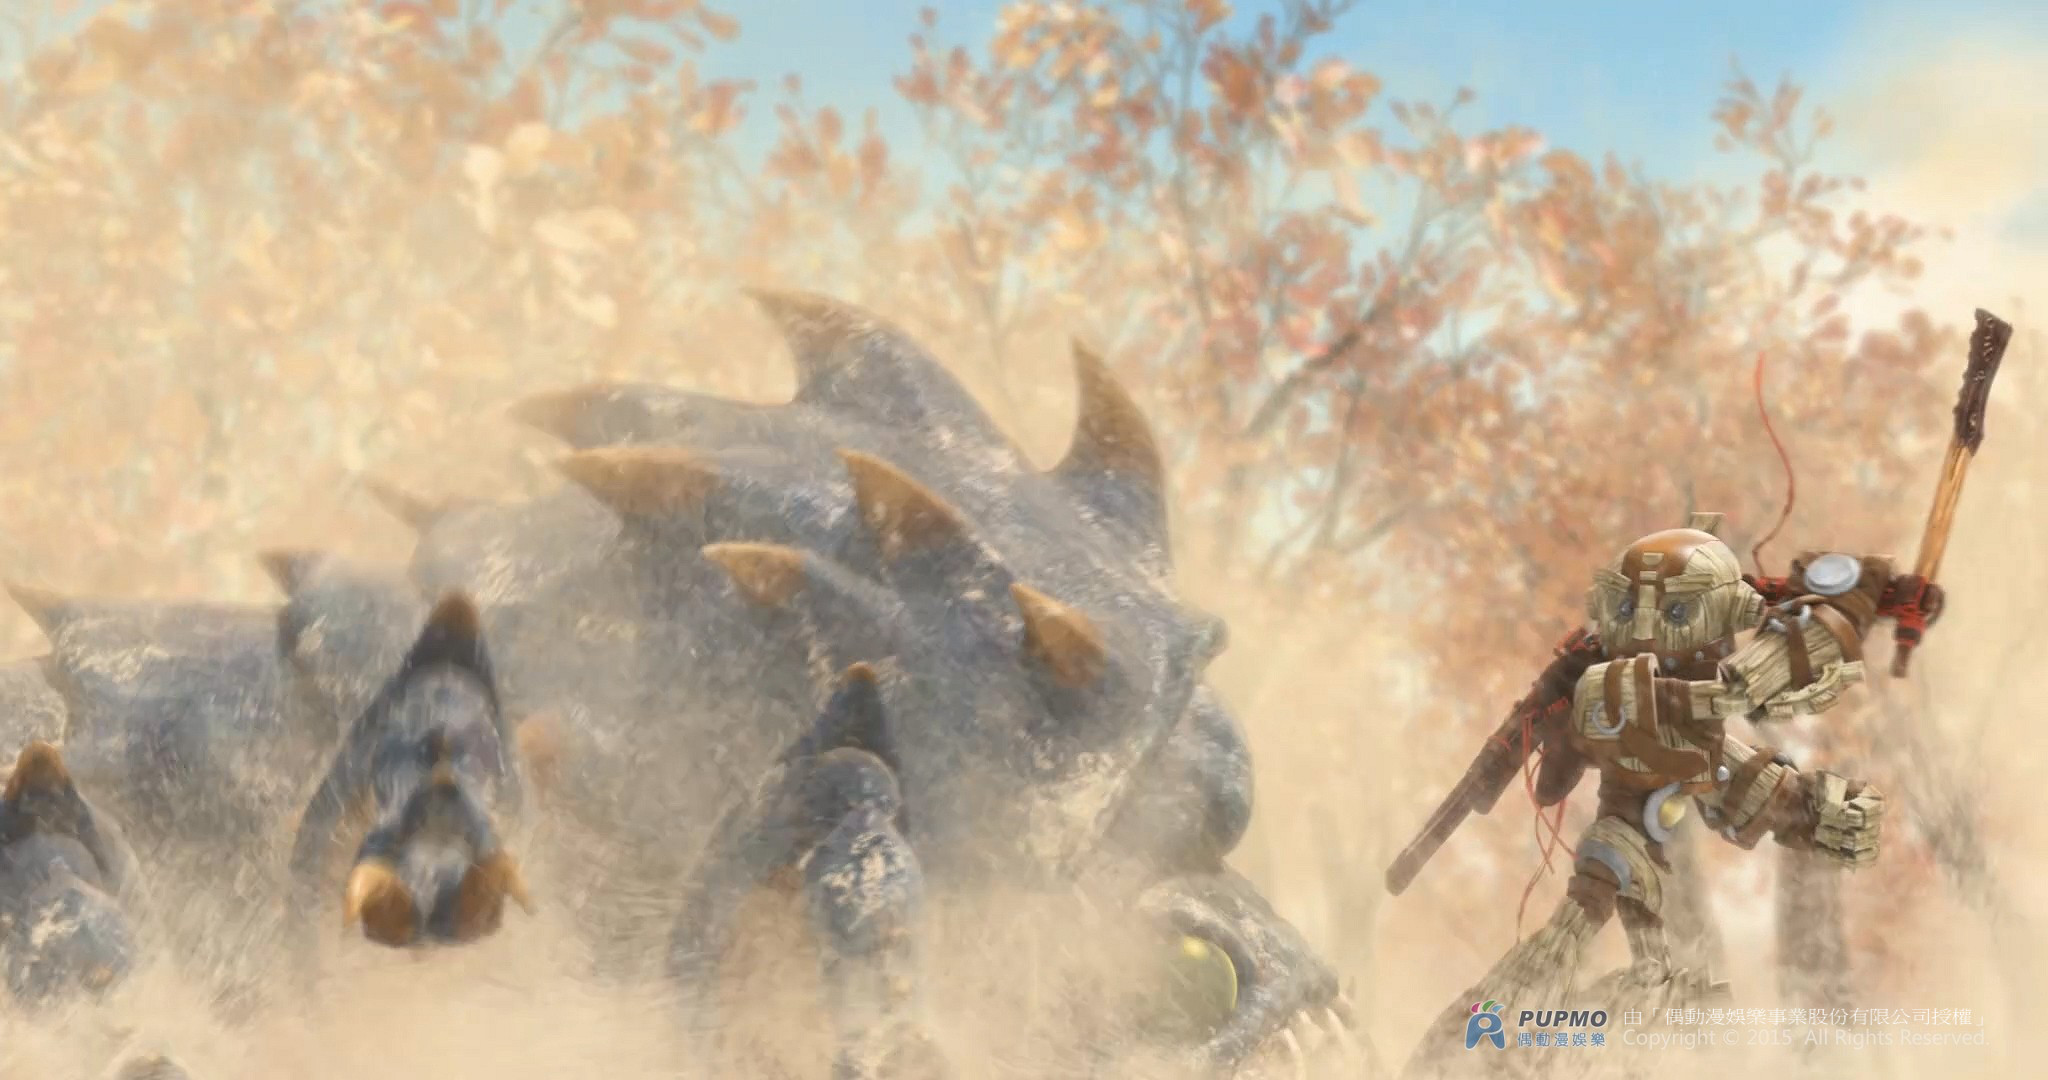 Movie - The Arti : The Adventure Begins - CGI & VFX : sand worm and the Arti. Click to view large image.